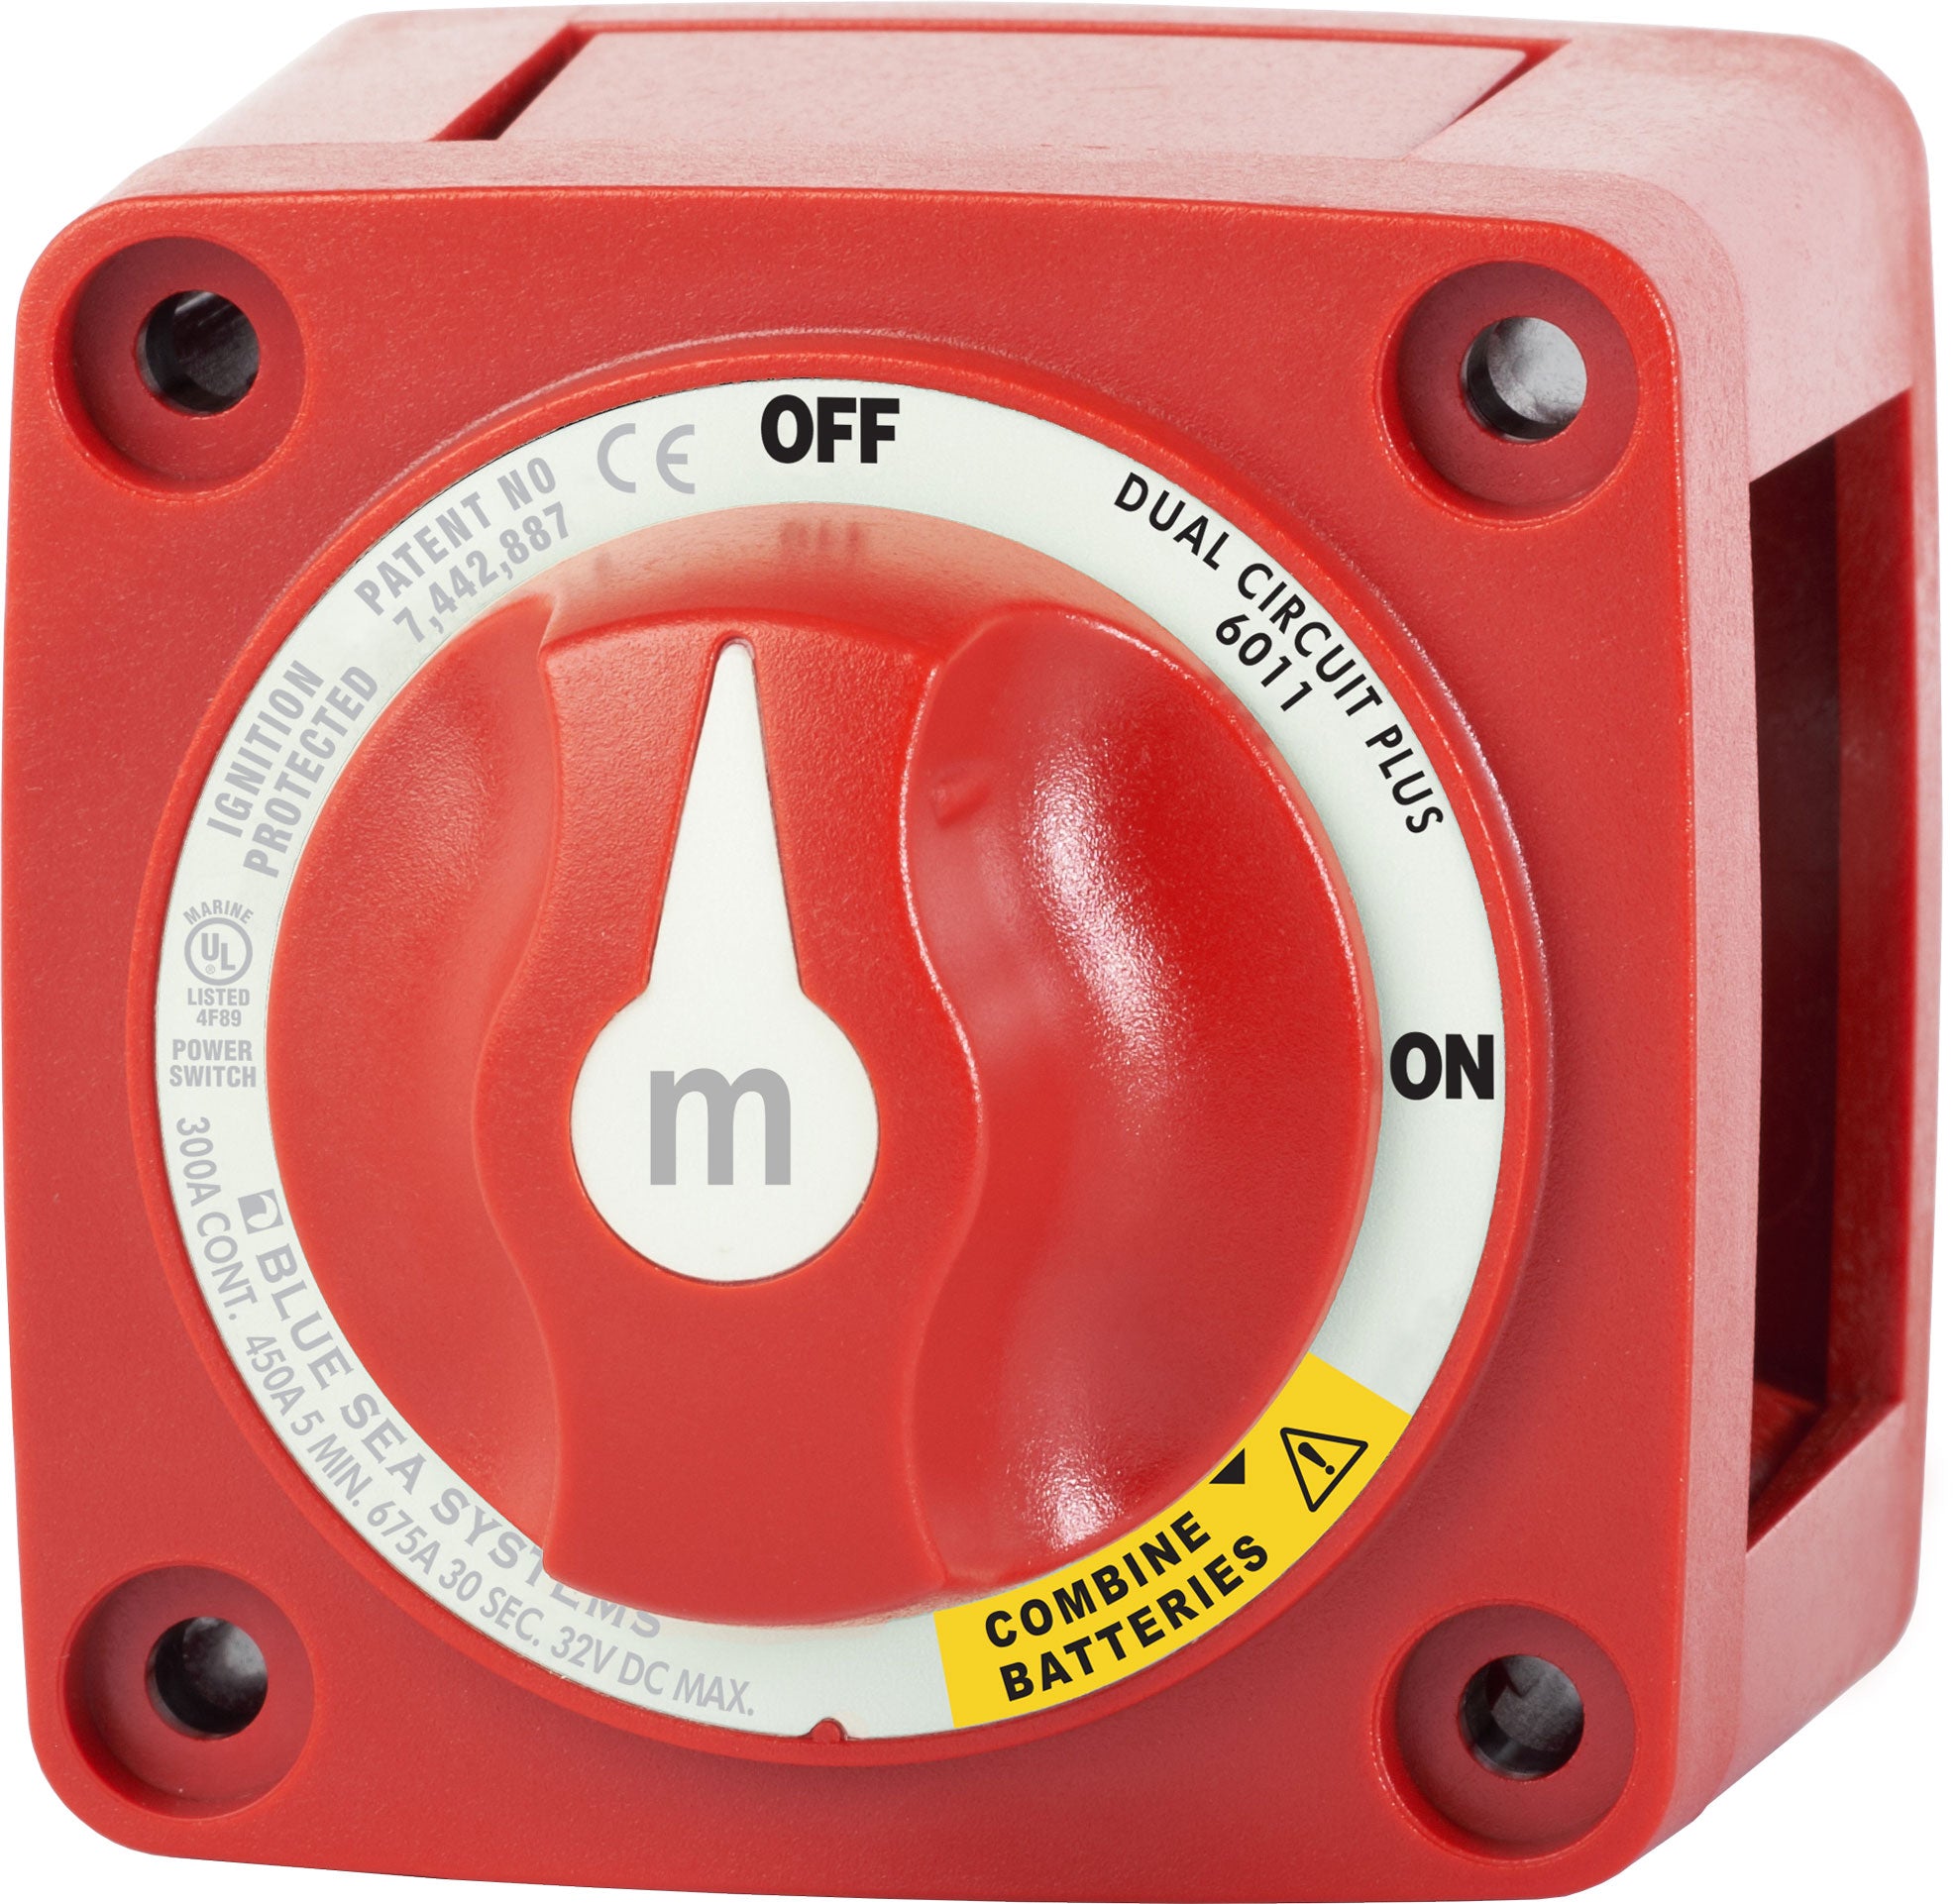 Blue Sea M-series Battery Switch On/off Dual Circuit Plus